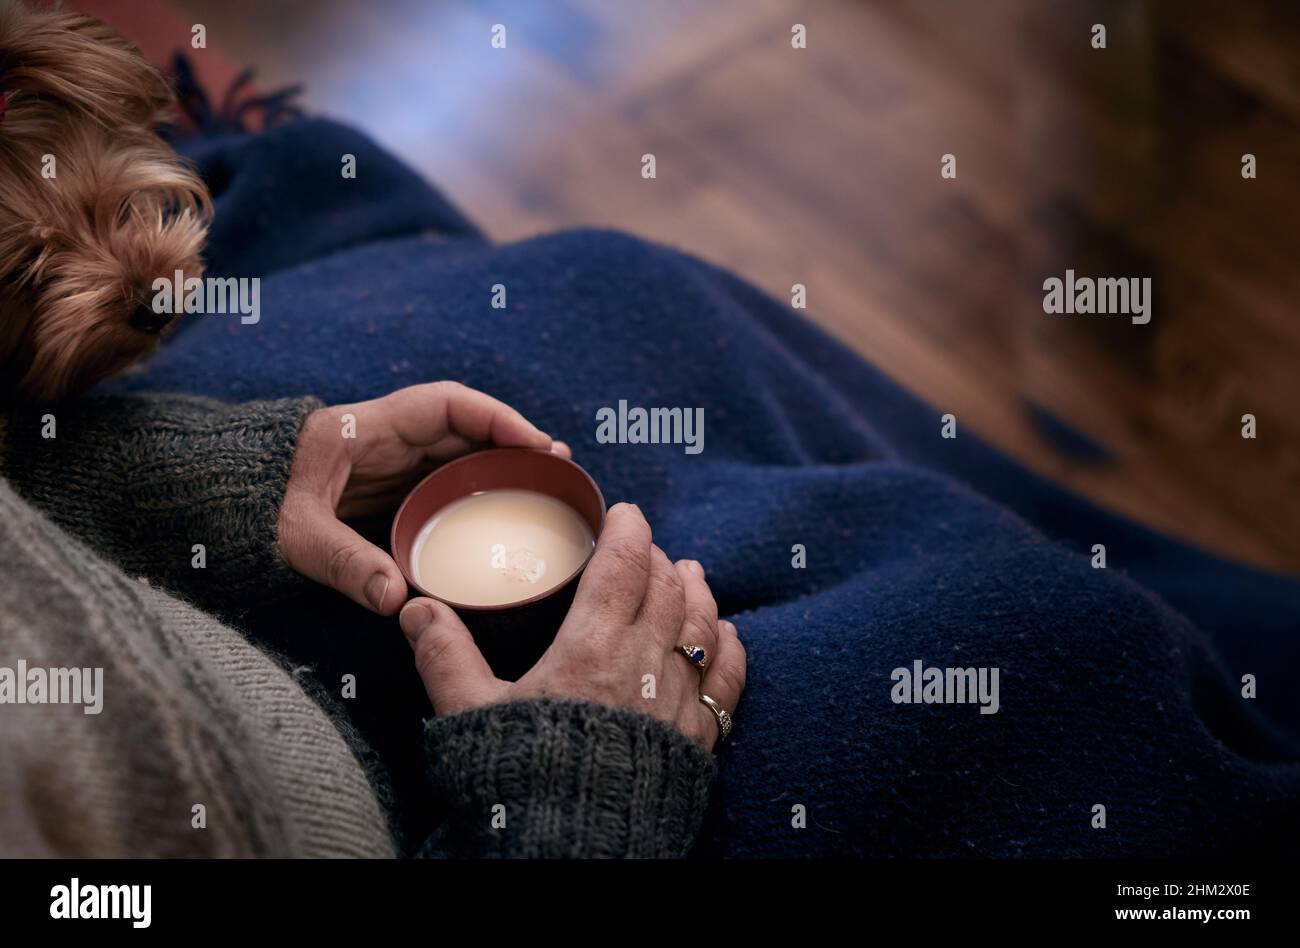 A woman sits hear pet covering her legs with a blue blanket and holds a cup of hot tea with milk in her hands. Stock Photo